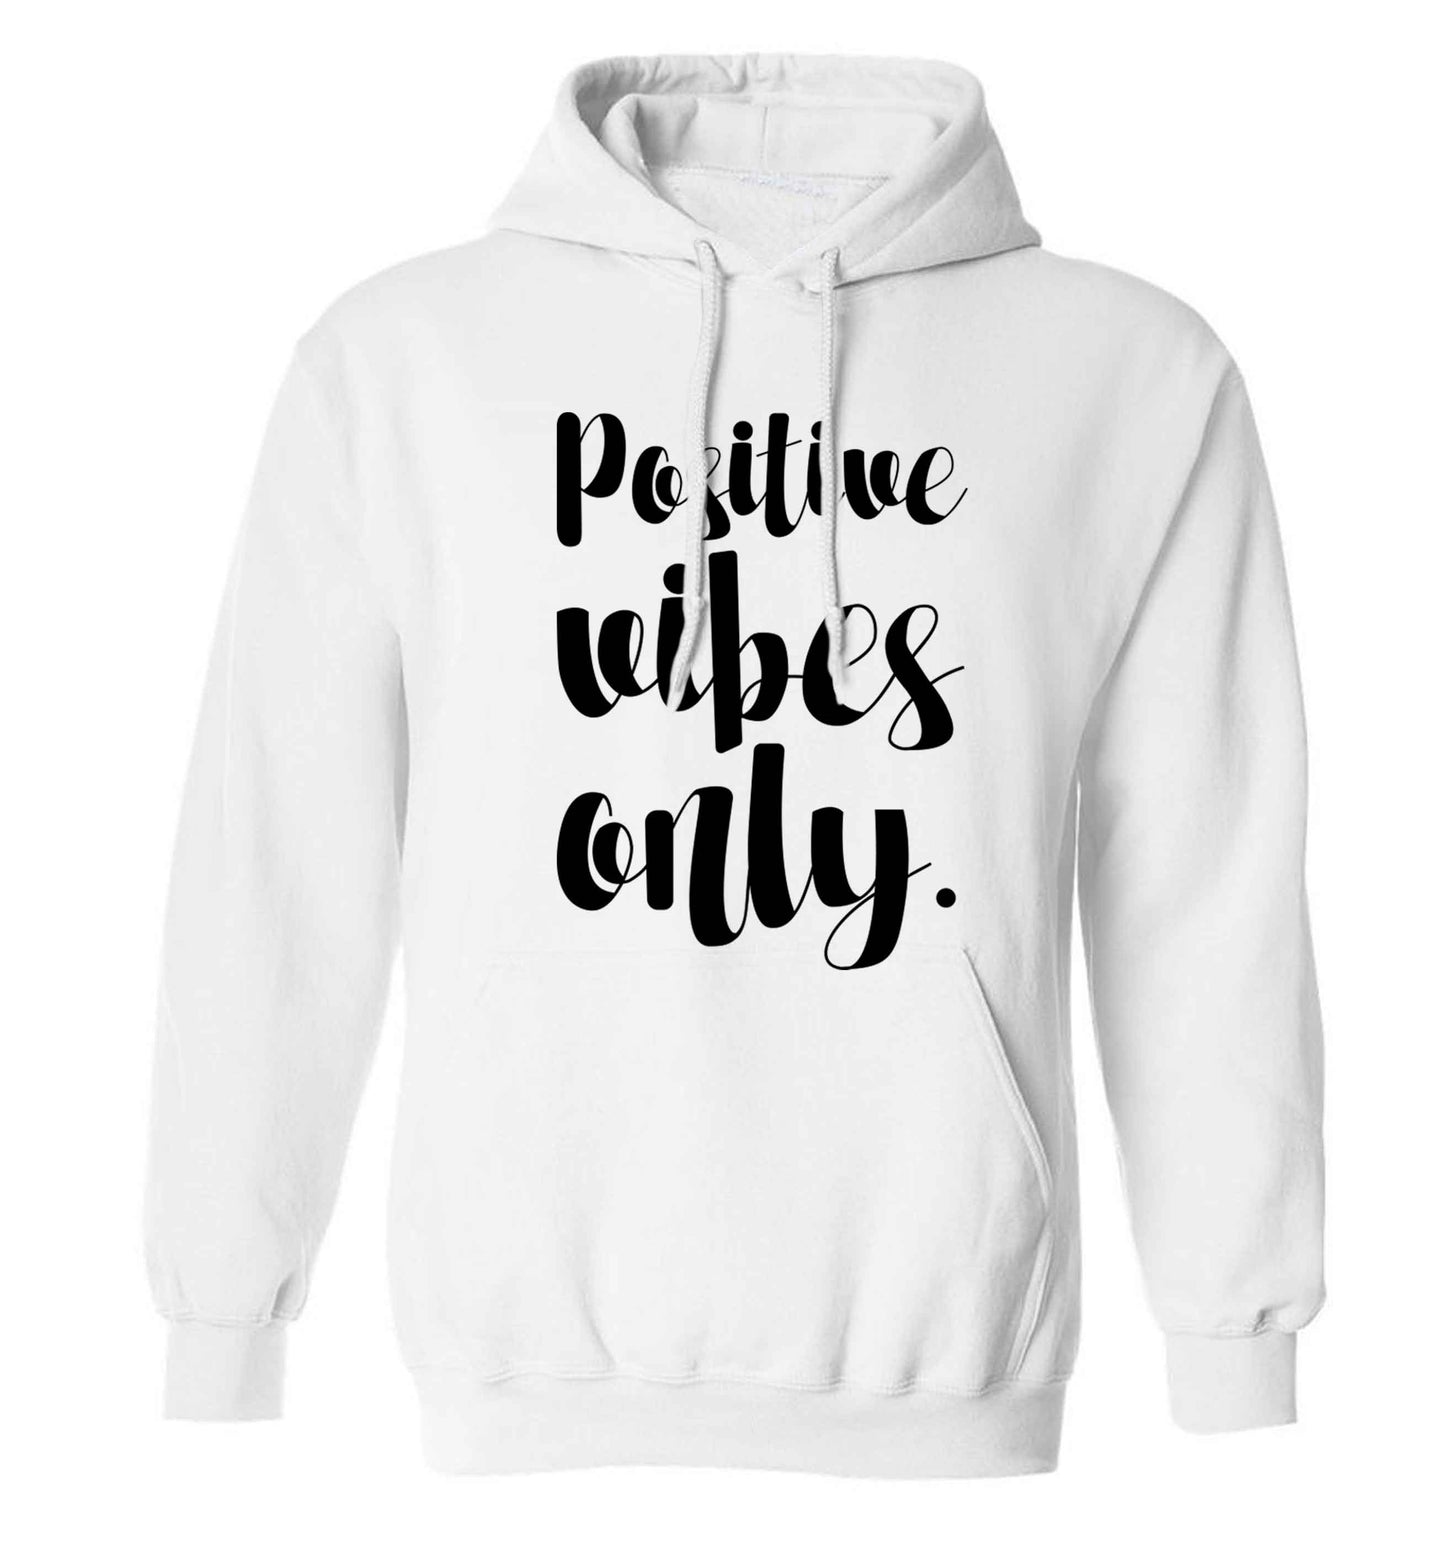 Positive vibes only adults unisex white hoodie 2XL